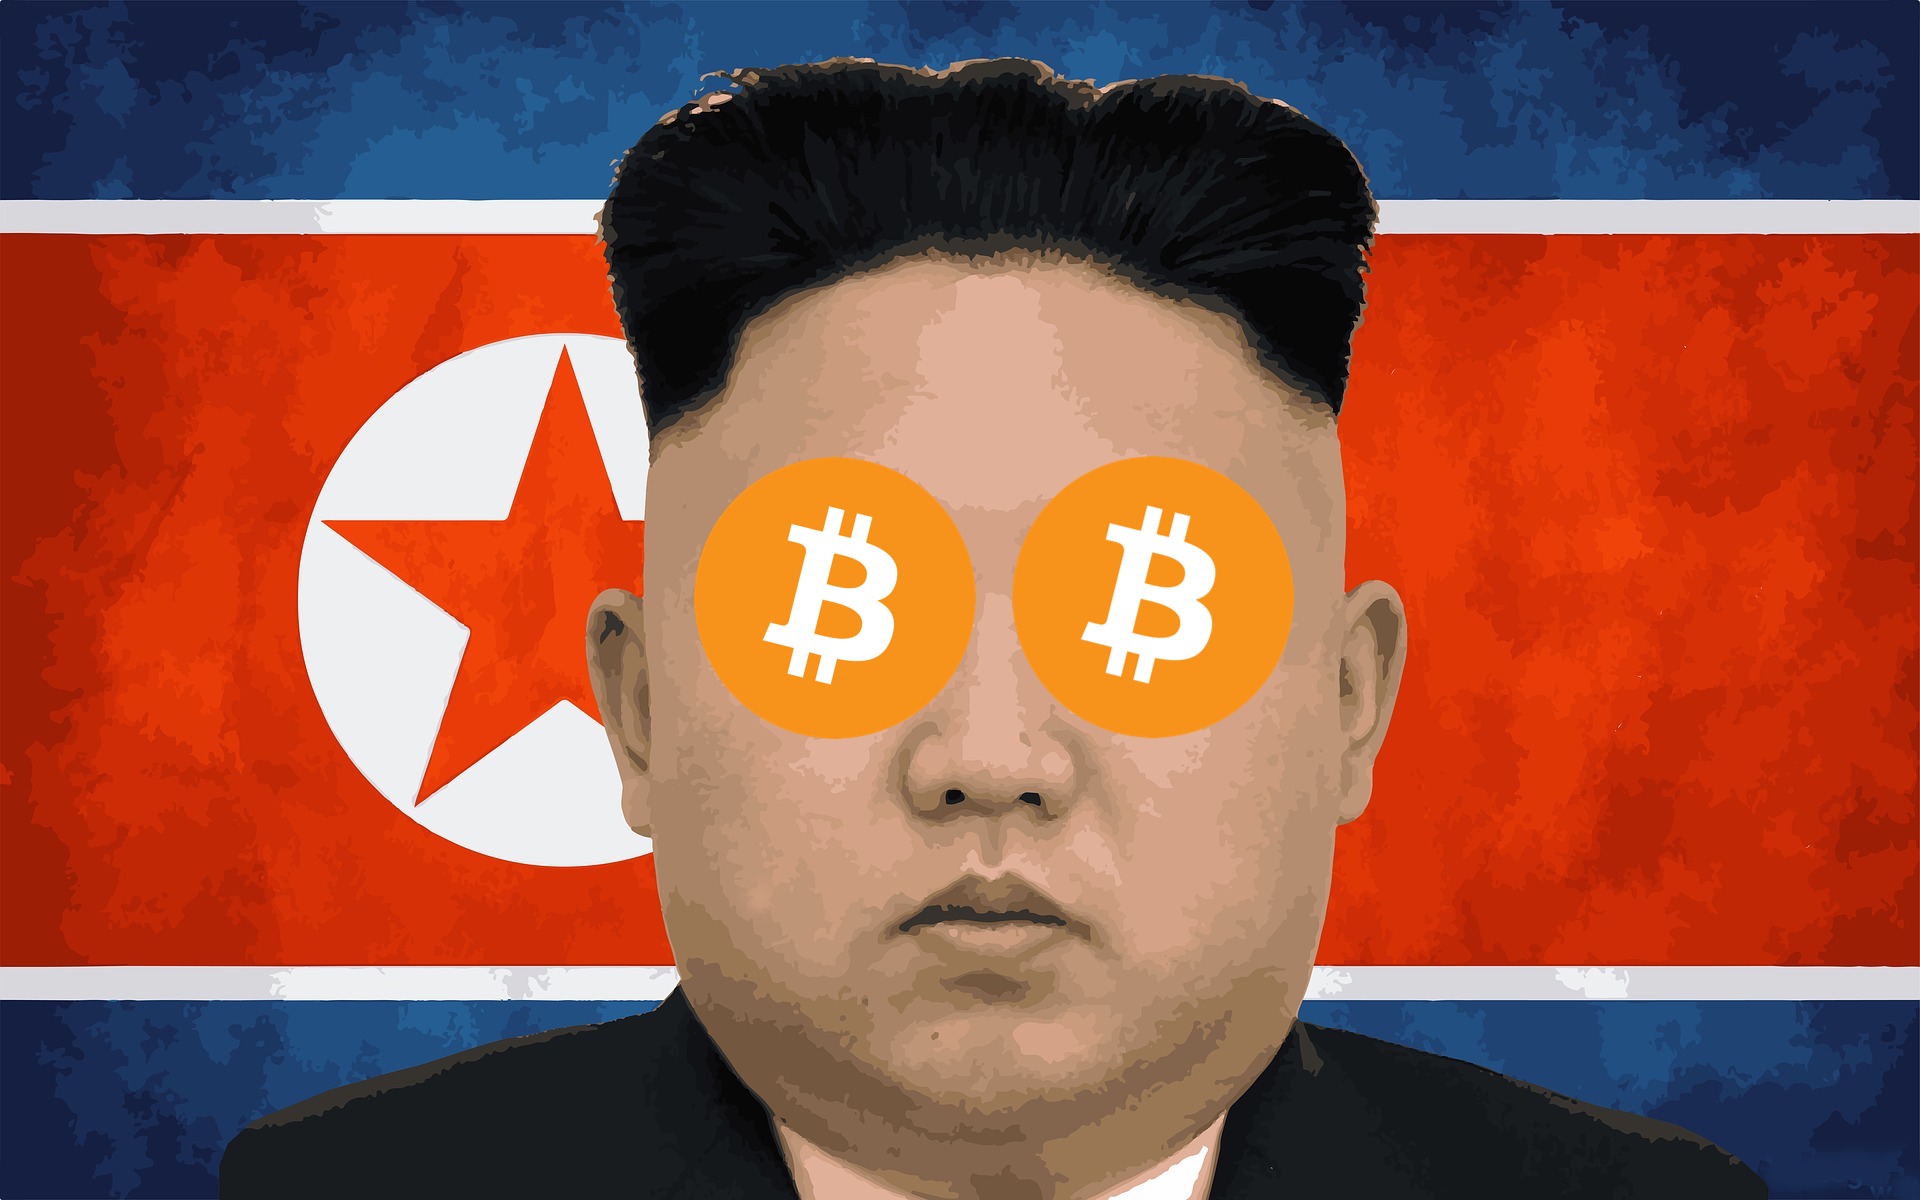 Crypto facts - North Korea’s military has stole more than half a billion dollars in cryptocurrency, and used blockchain technology to cover its tracks.-u/tommybauch